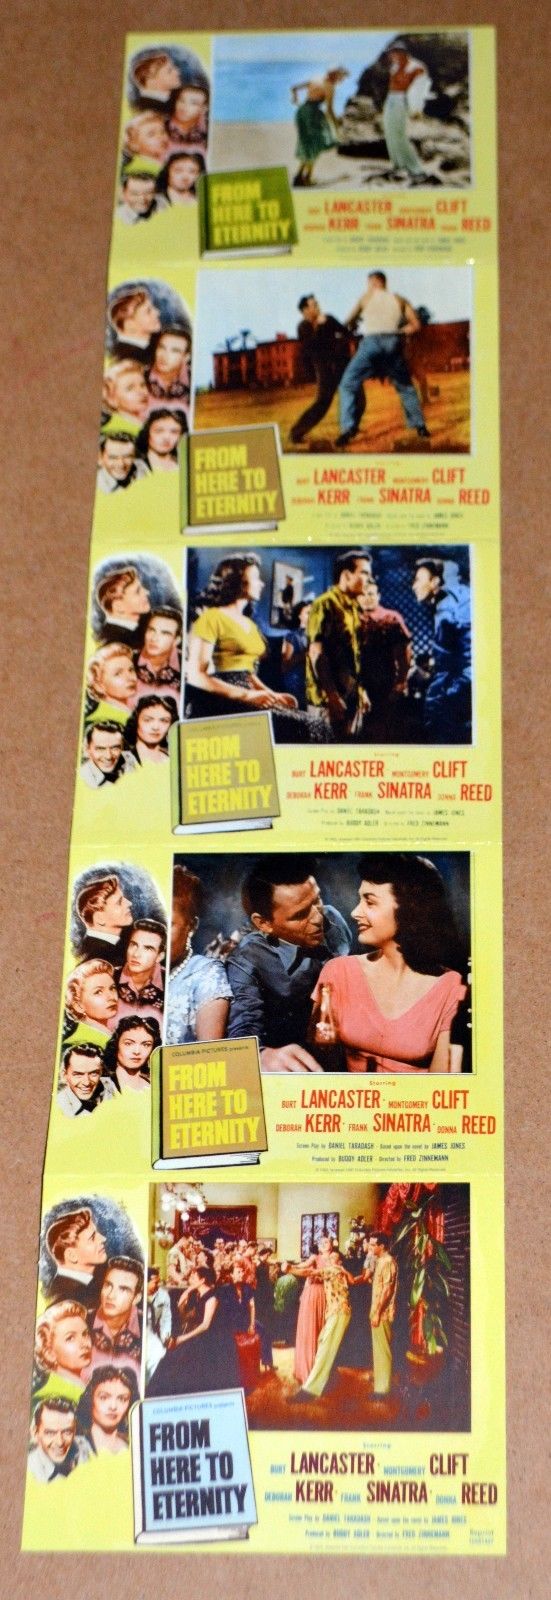 FROM HERE TO ETERNITY 5 MINI LOBBY CARDS~LANCASTER, CLIFT, KERR, SINATRA & REED